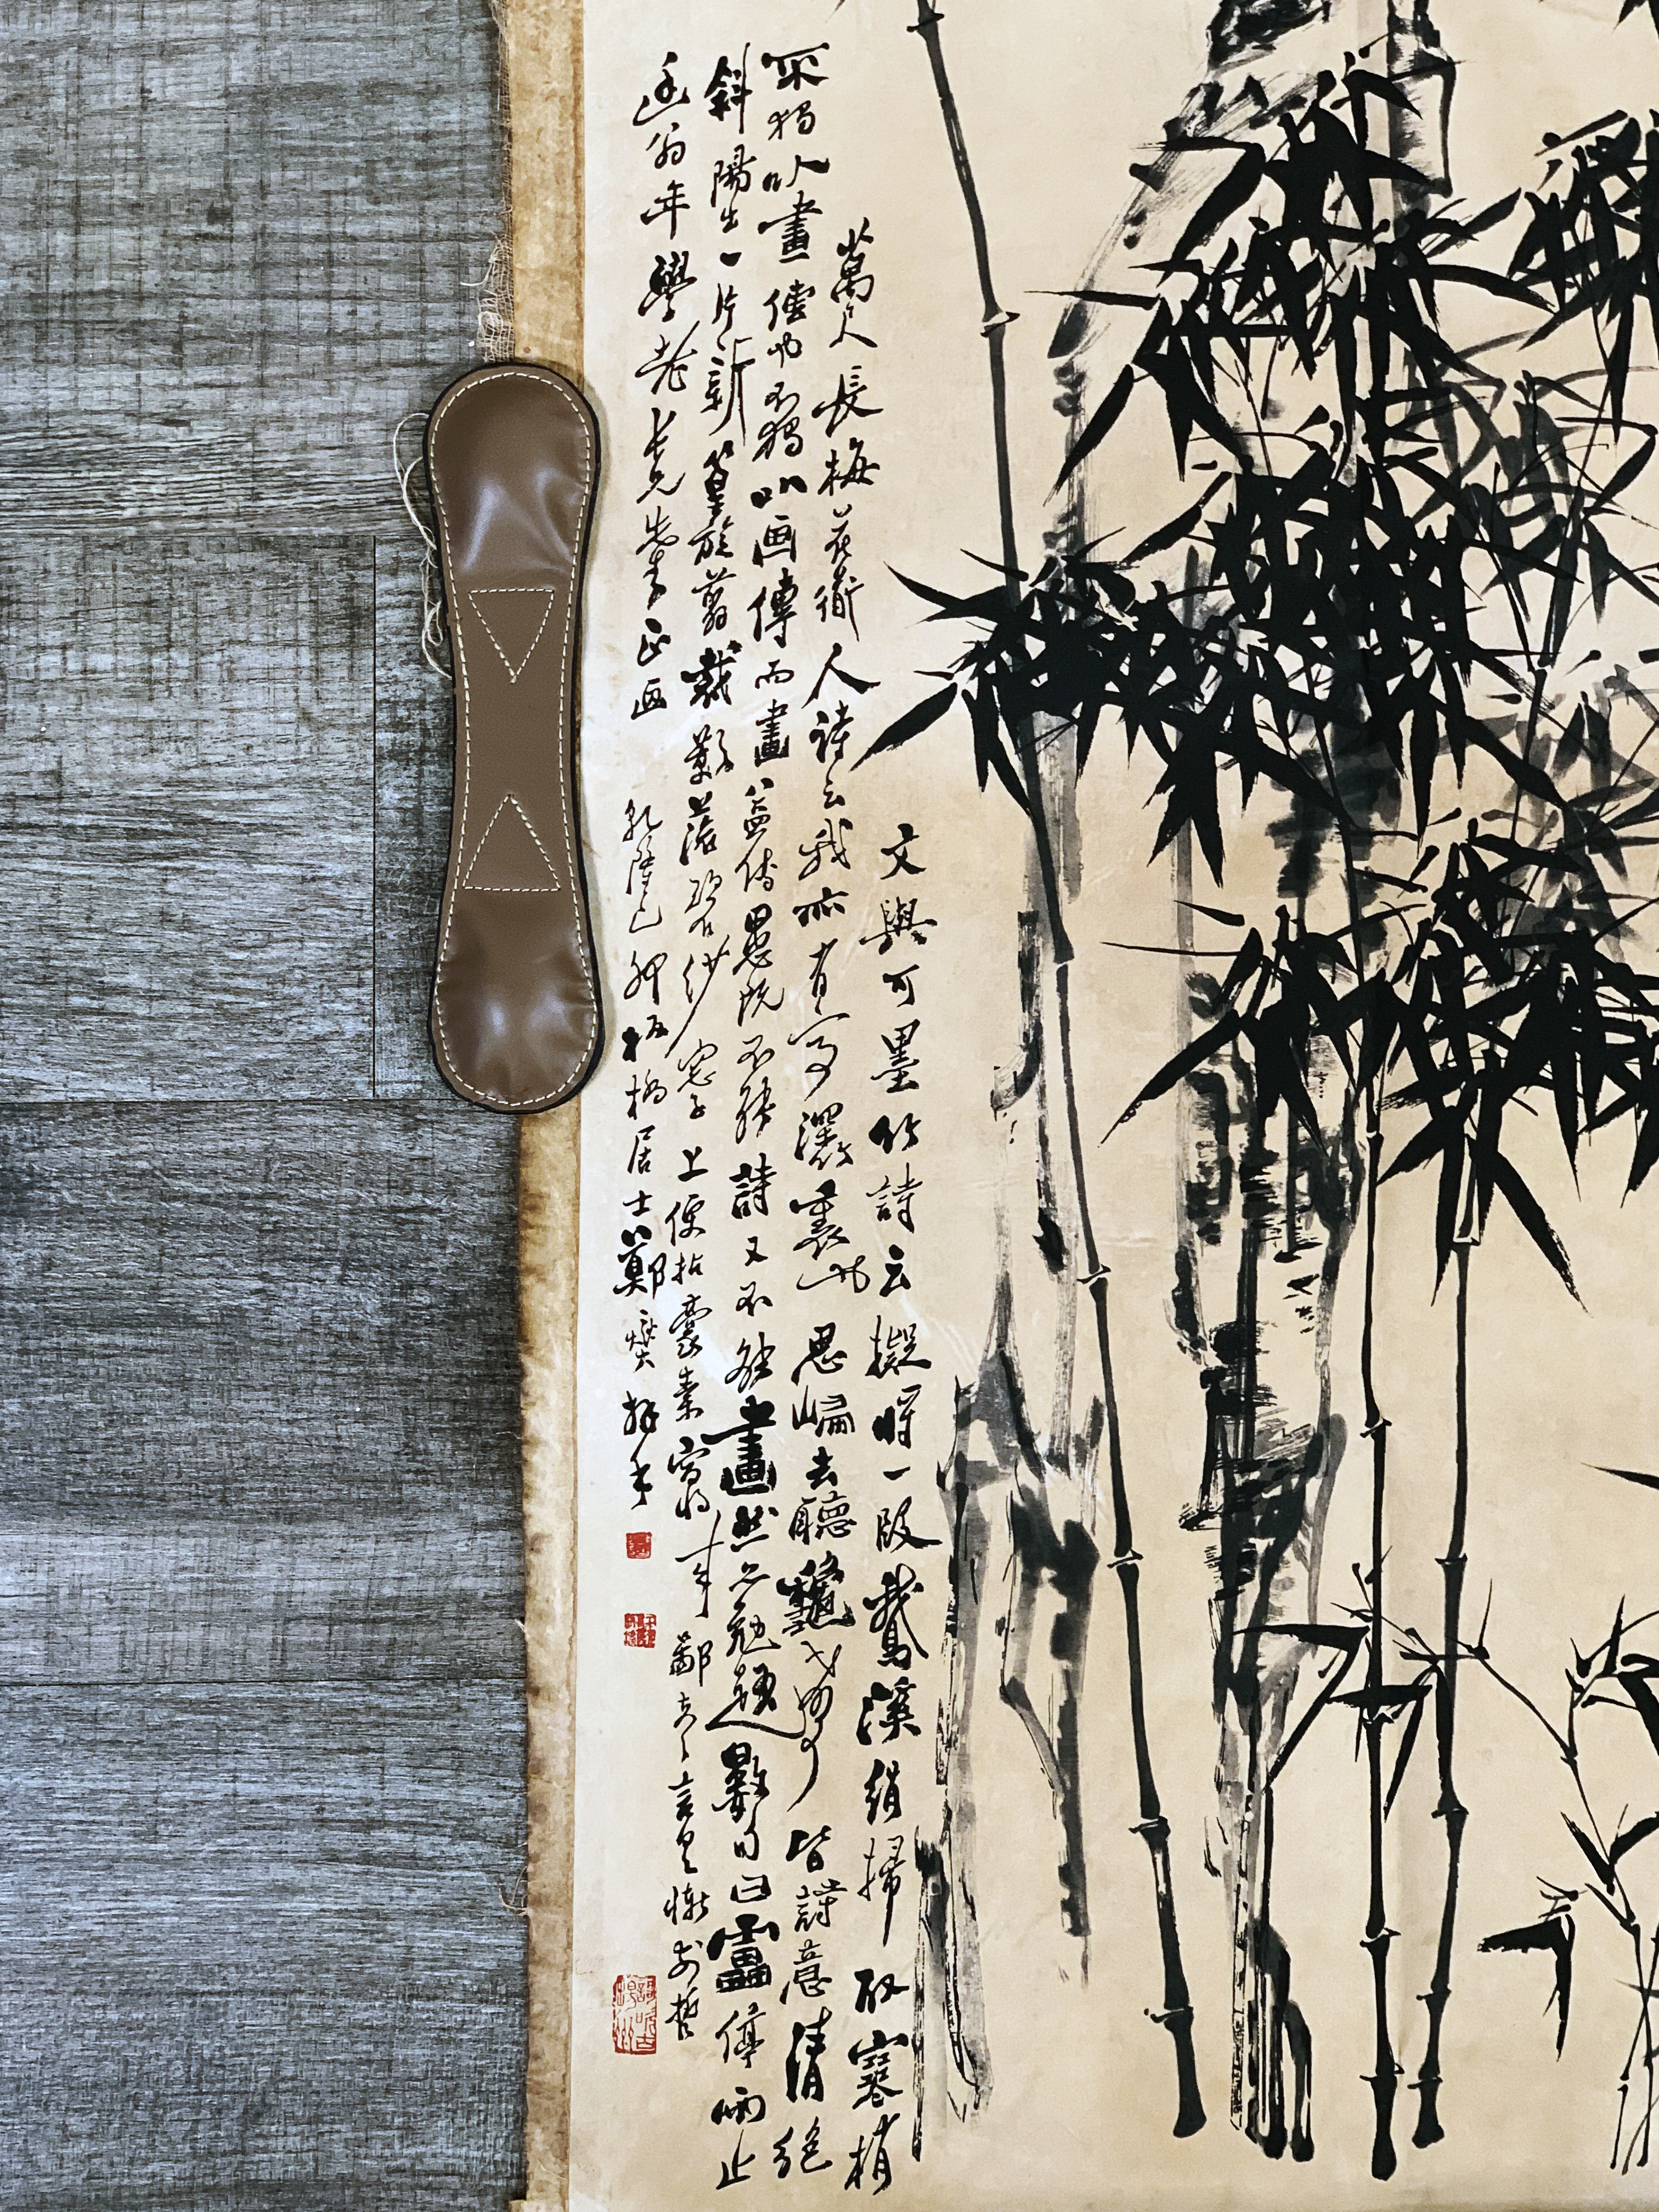 Serene Bamboo Grove Antique Chinese Scroll image 2